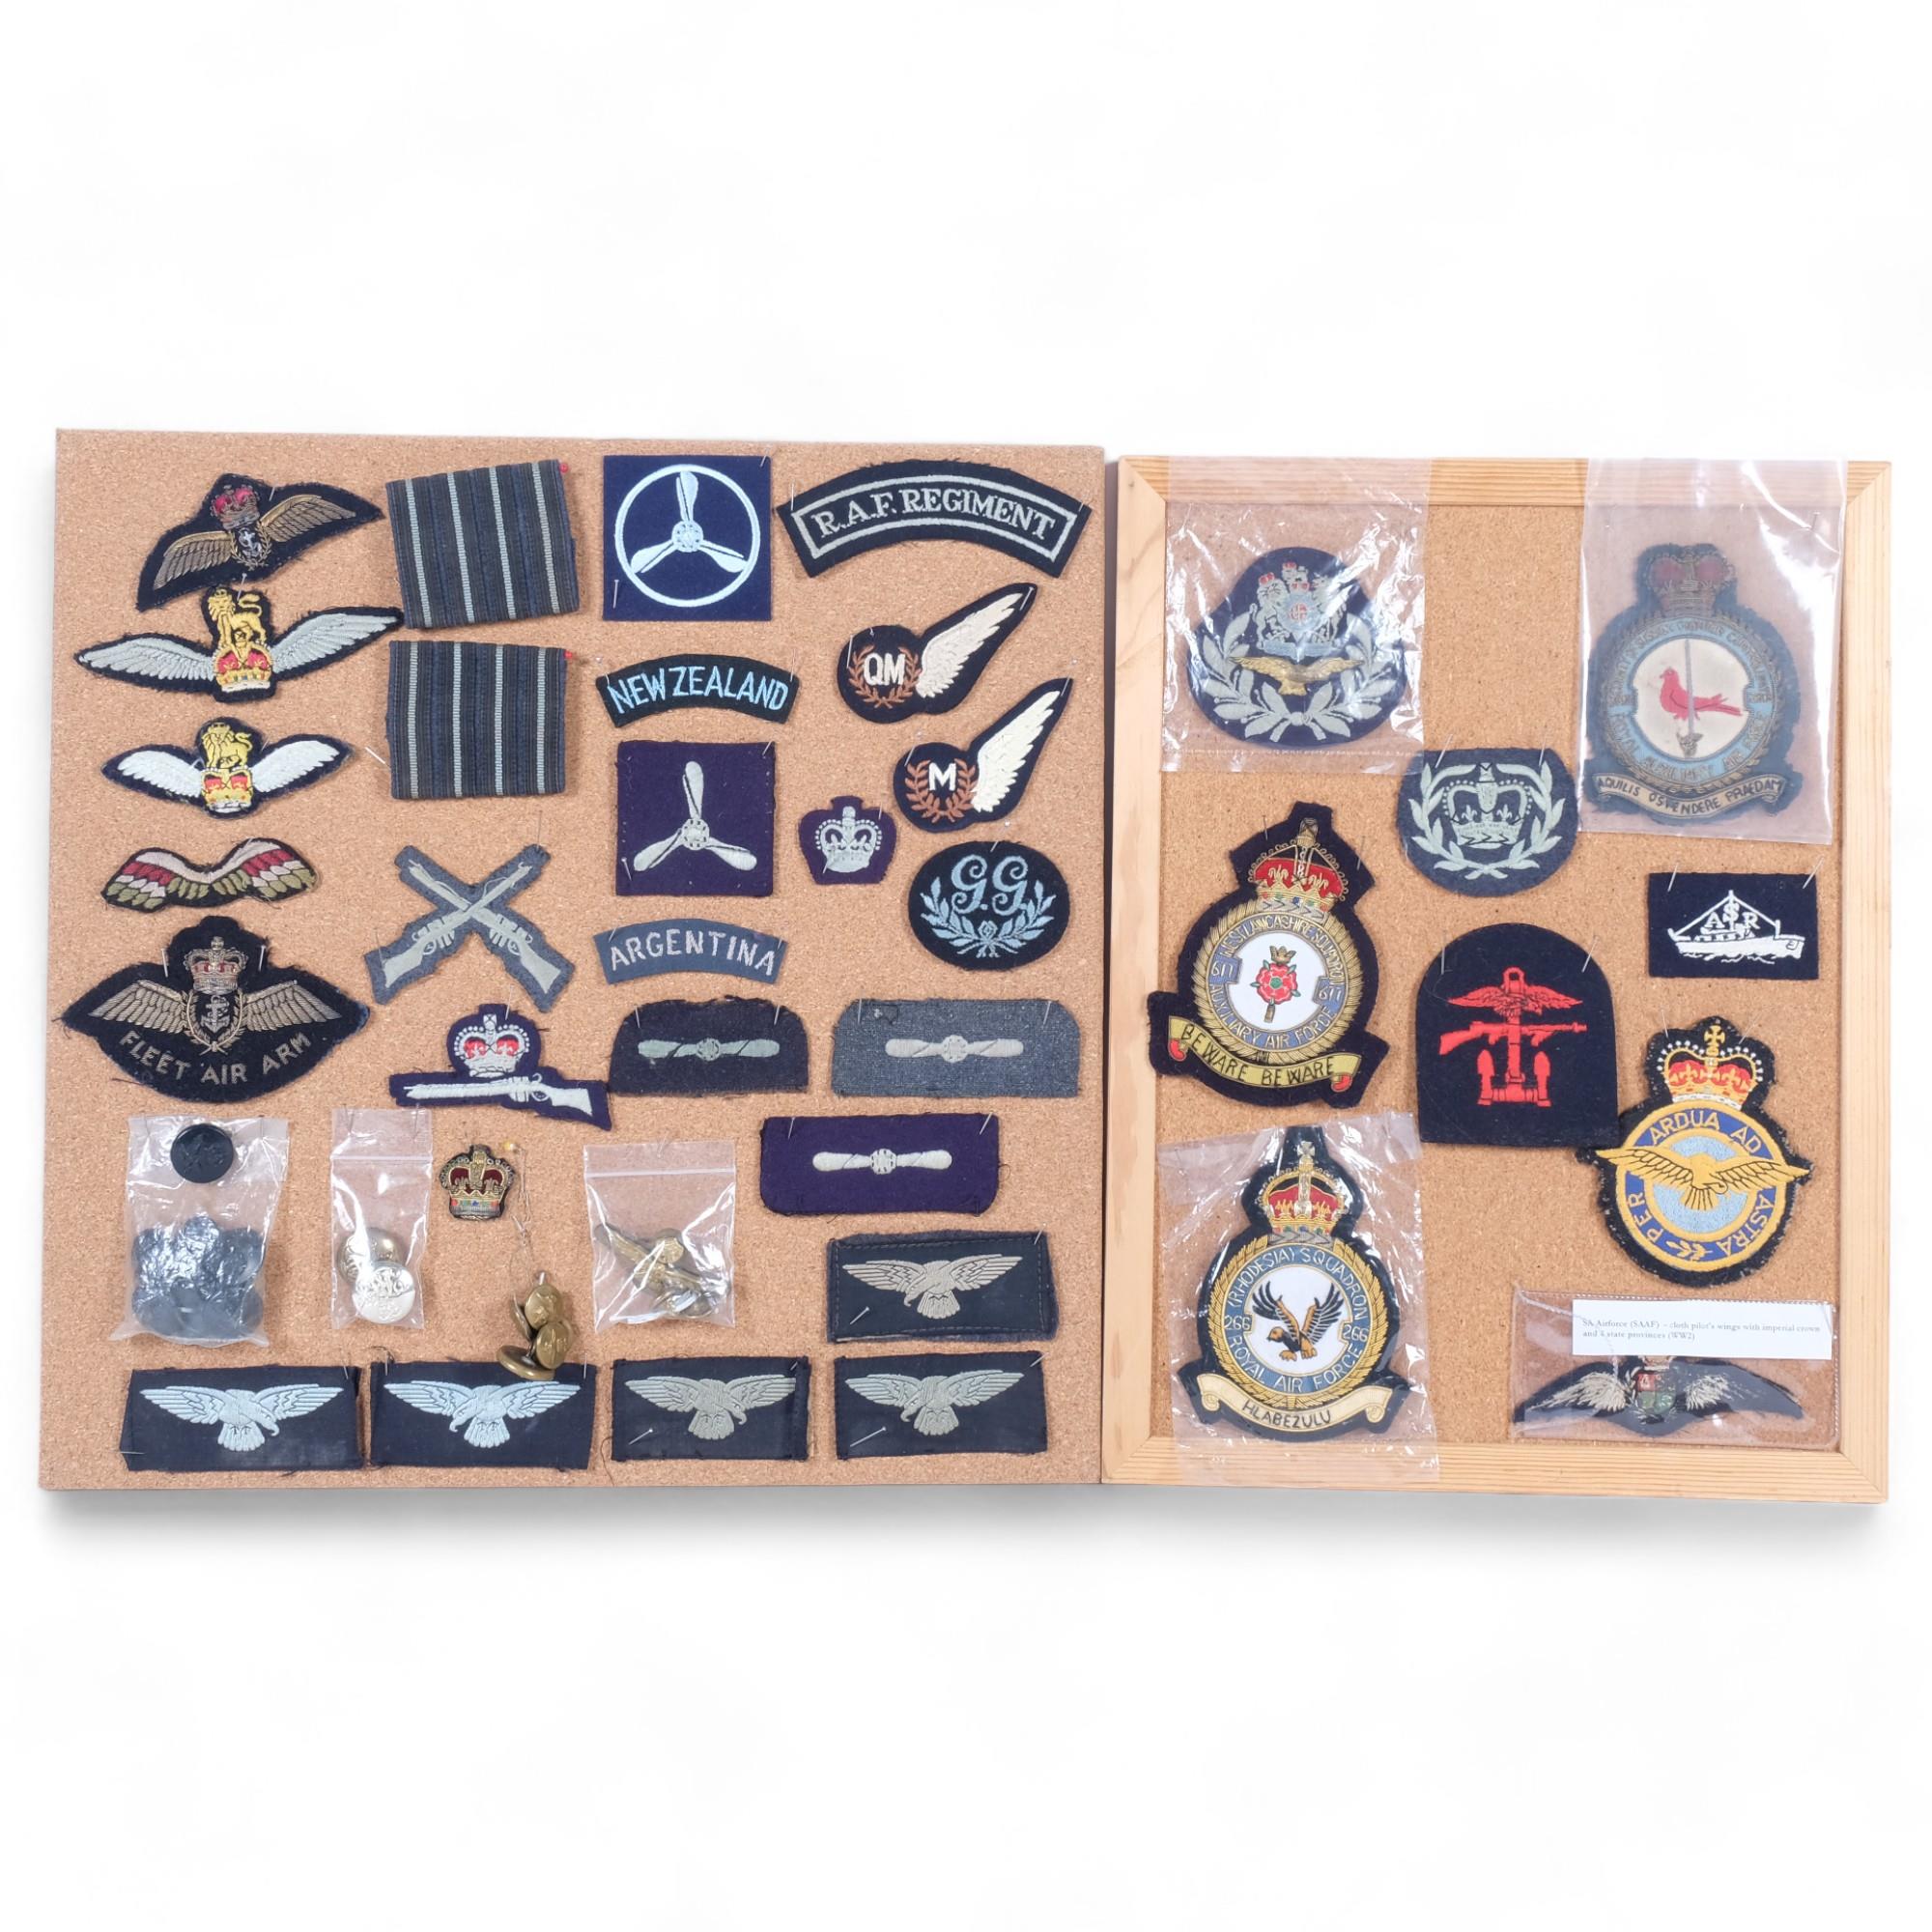 A collection of cloth military badges, including New Zealand, Argentina, RAF, etc, and various